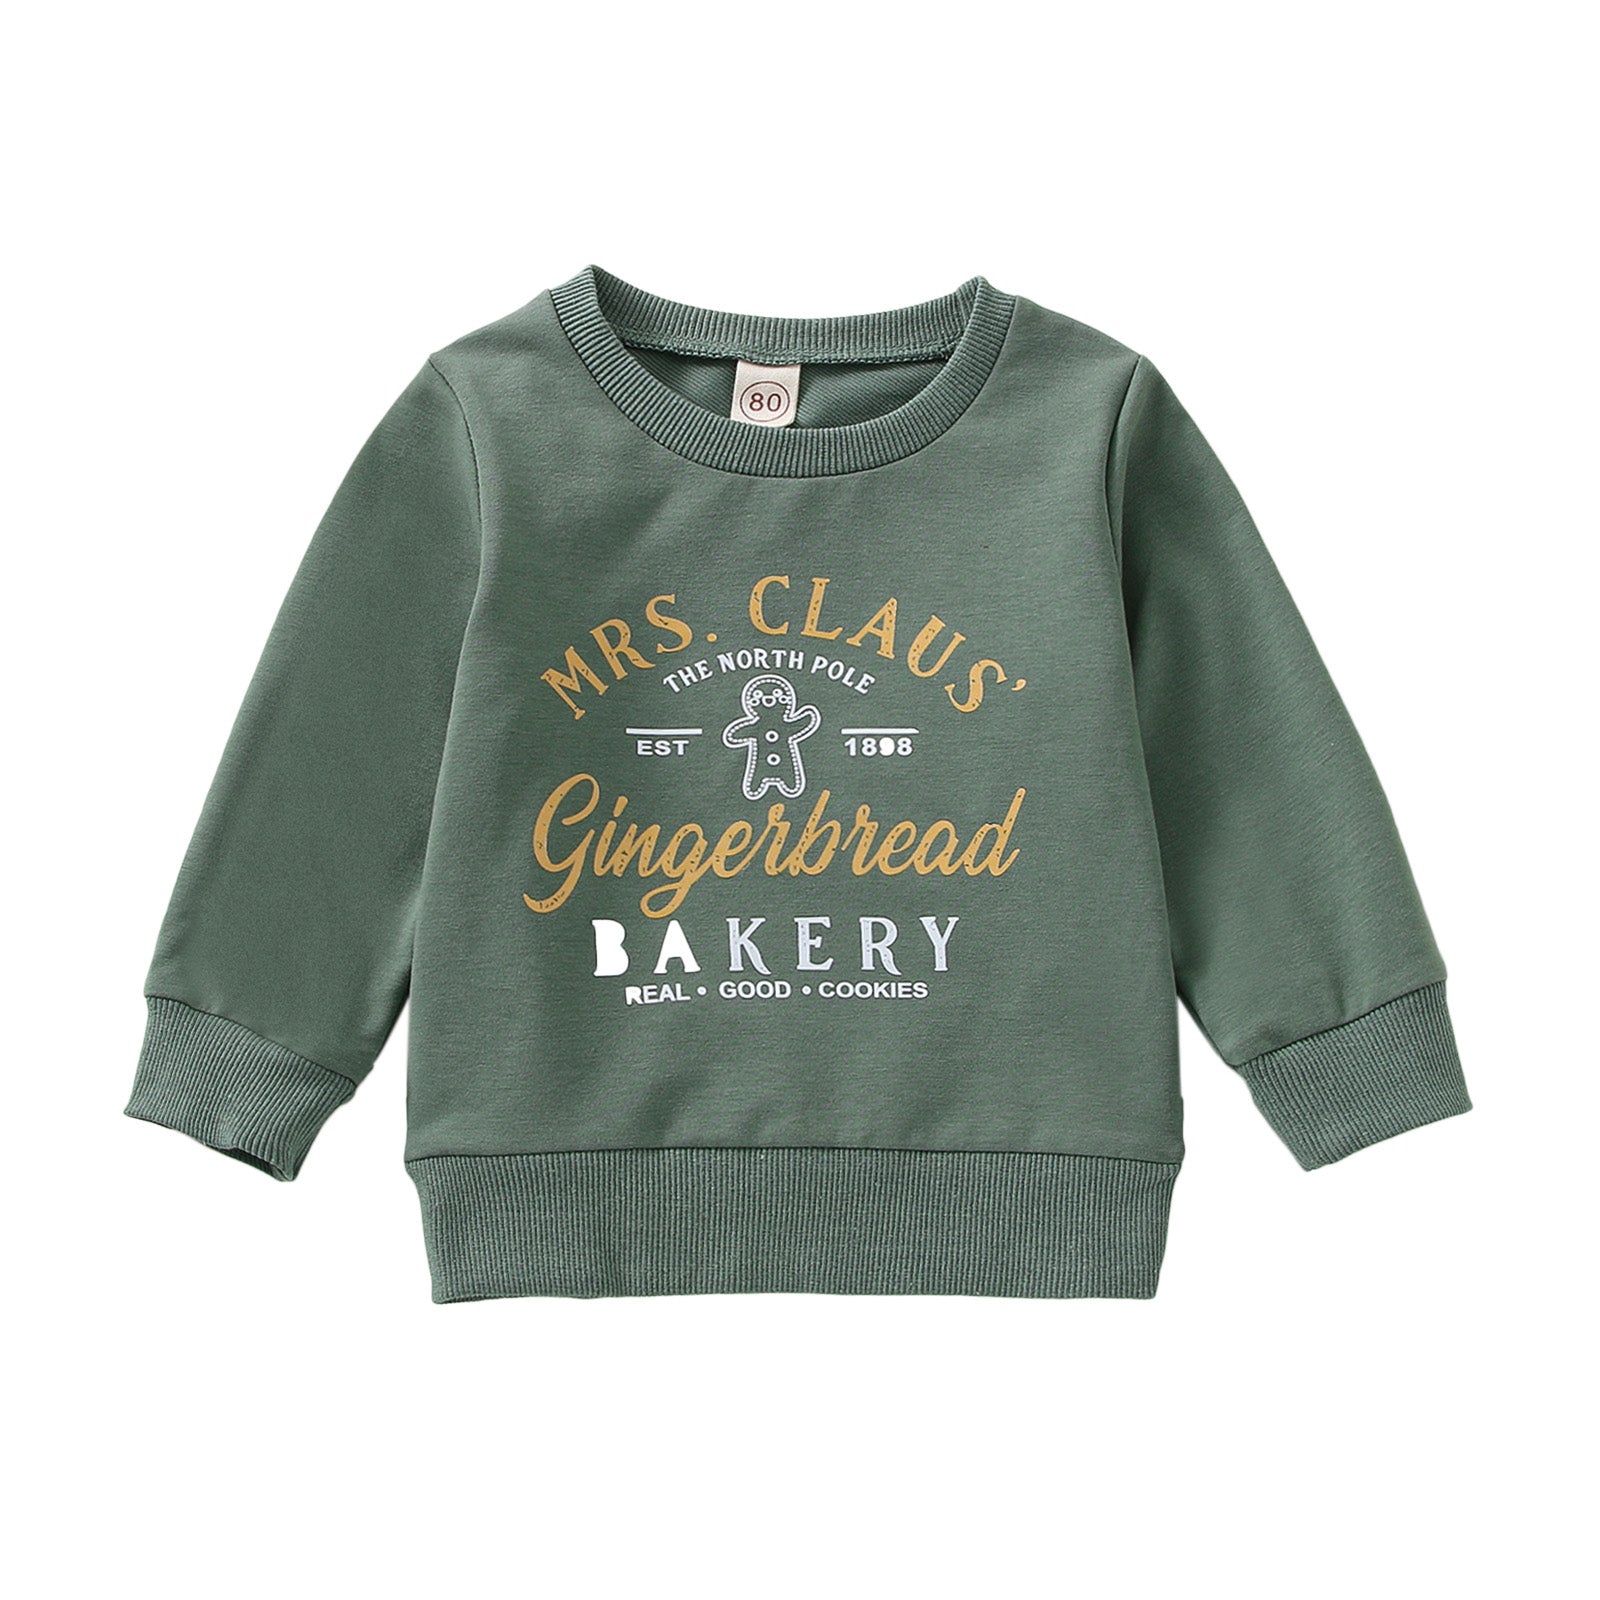 Toddler Gingeiniead Tops.